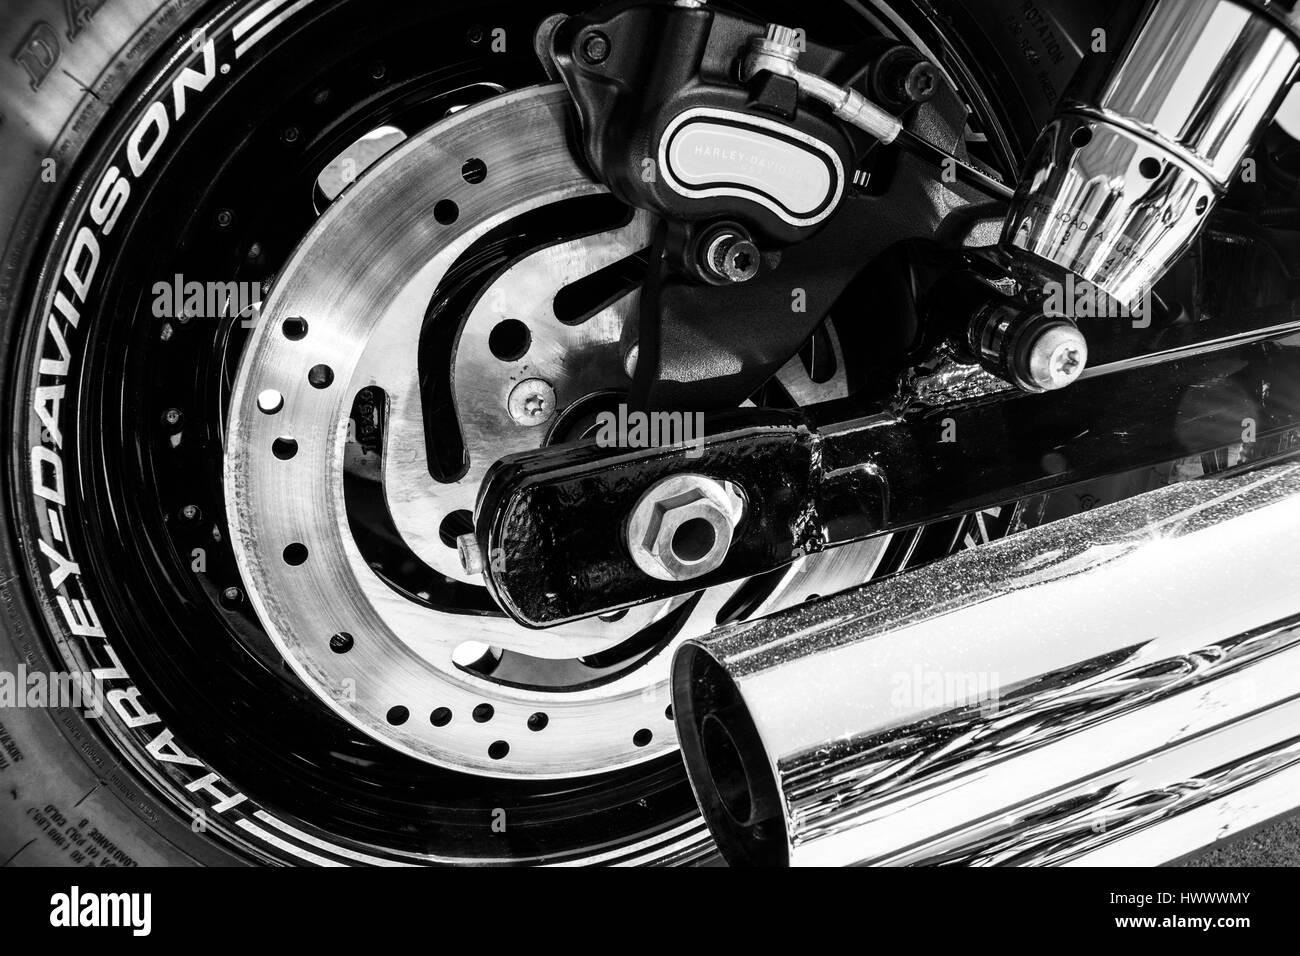 Indianapolis - Circa March 2017: Rear Tire, Brake Rotor and Exhaust Pipe of a Harley Davidson. Harley Davidson Motorcycles are Known for Their Loyal F Stock Photo